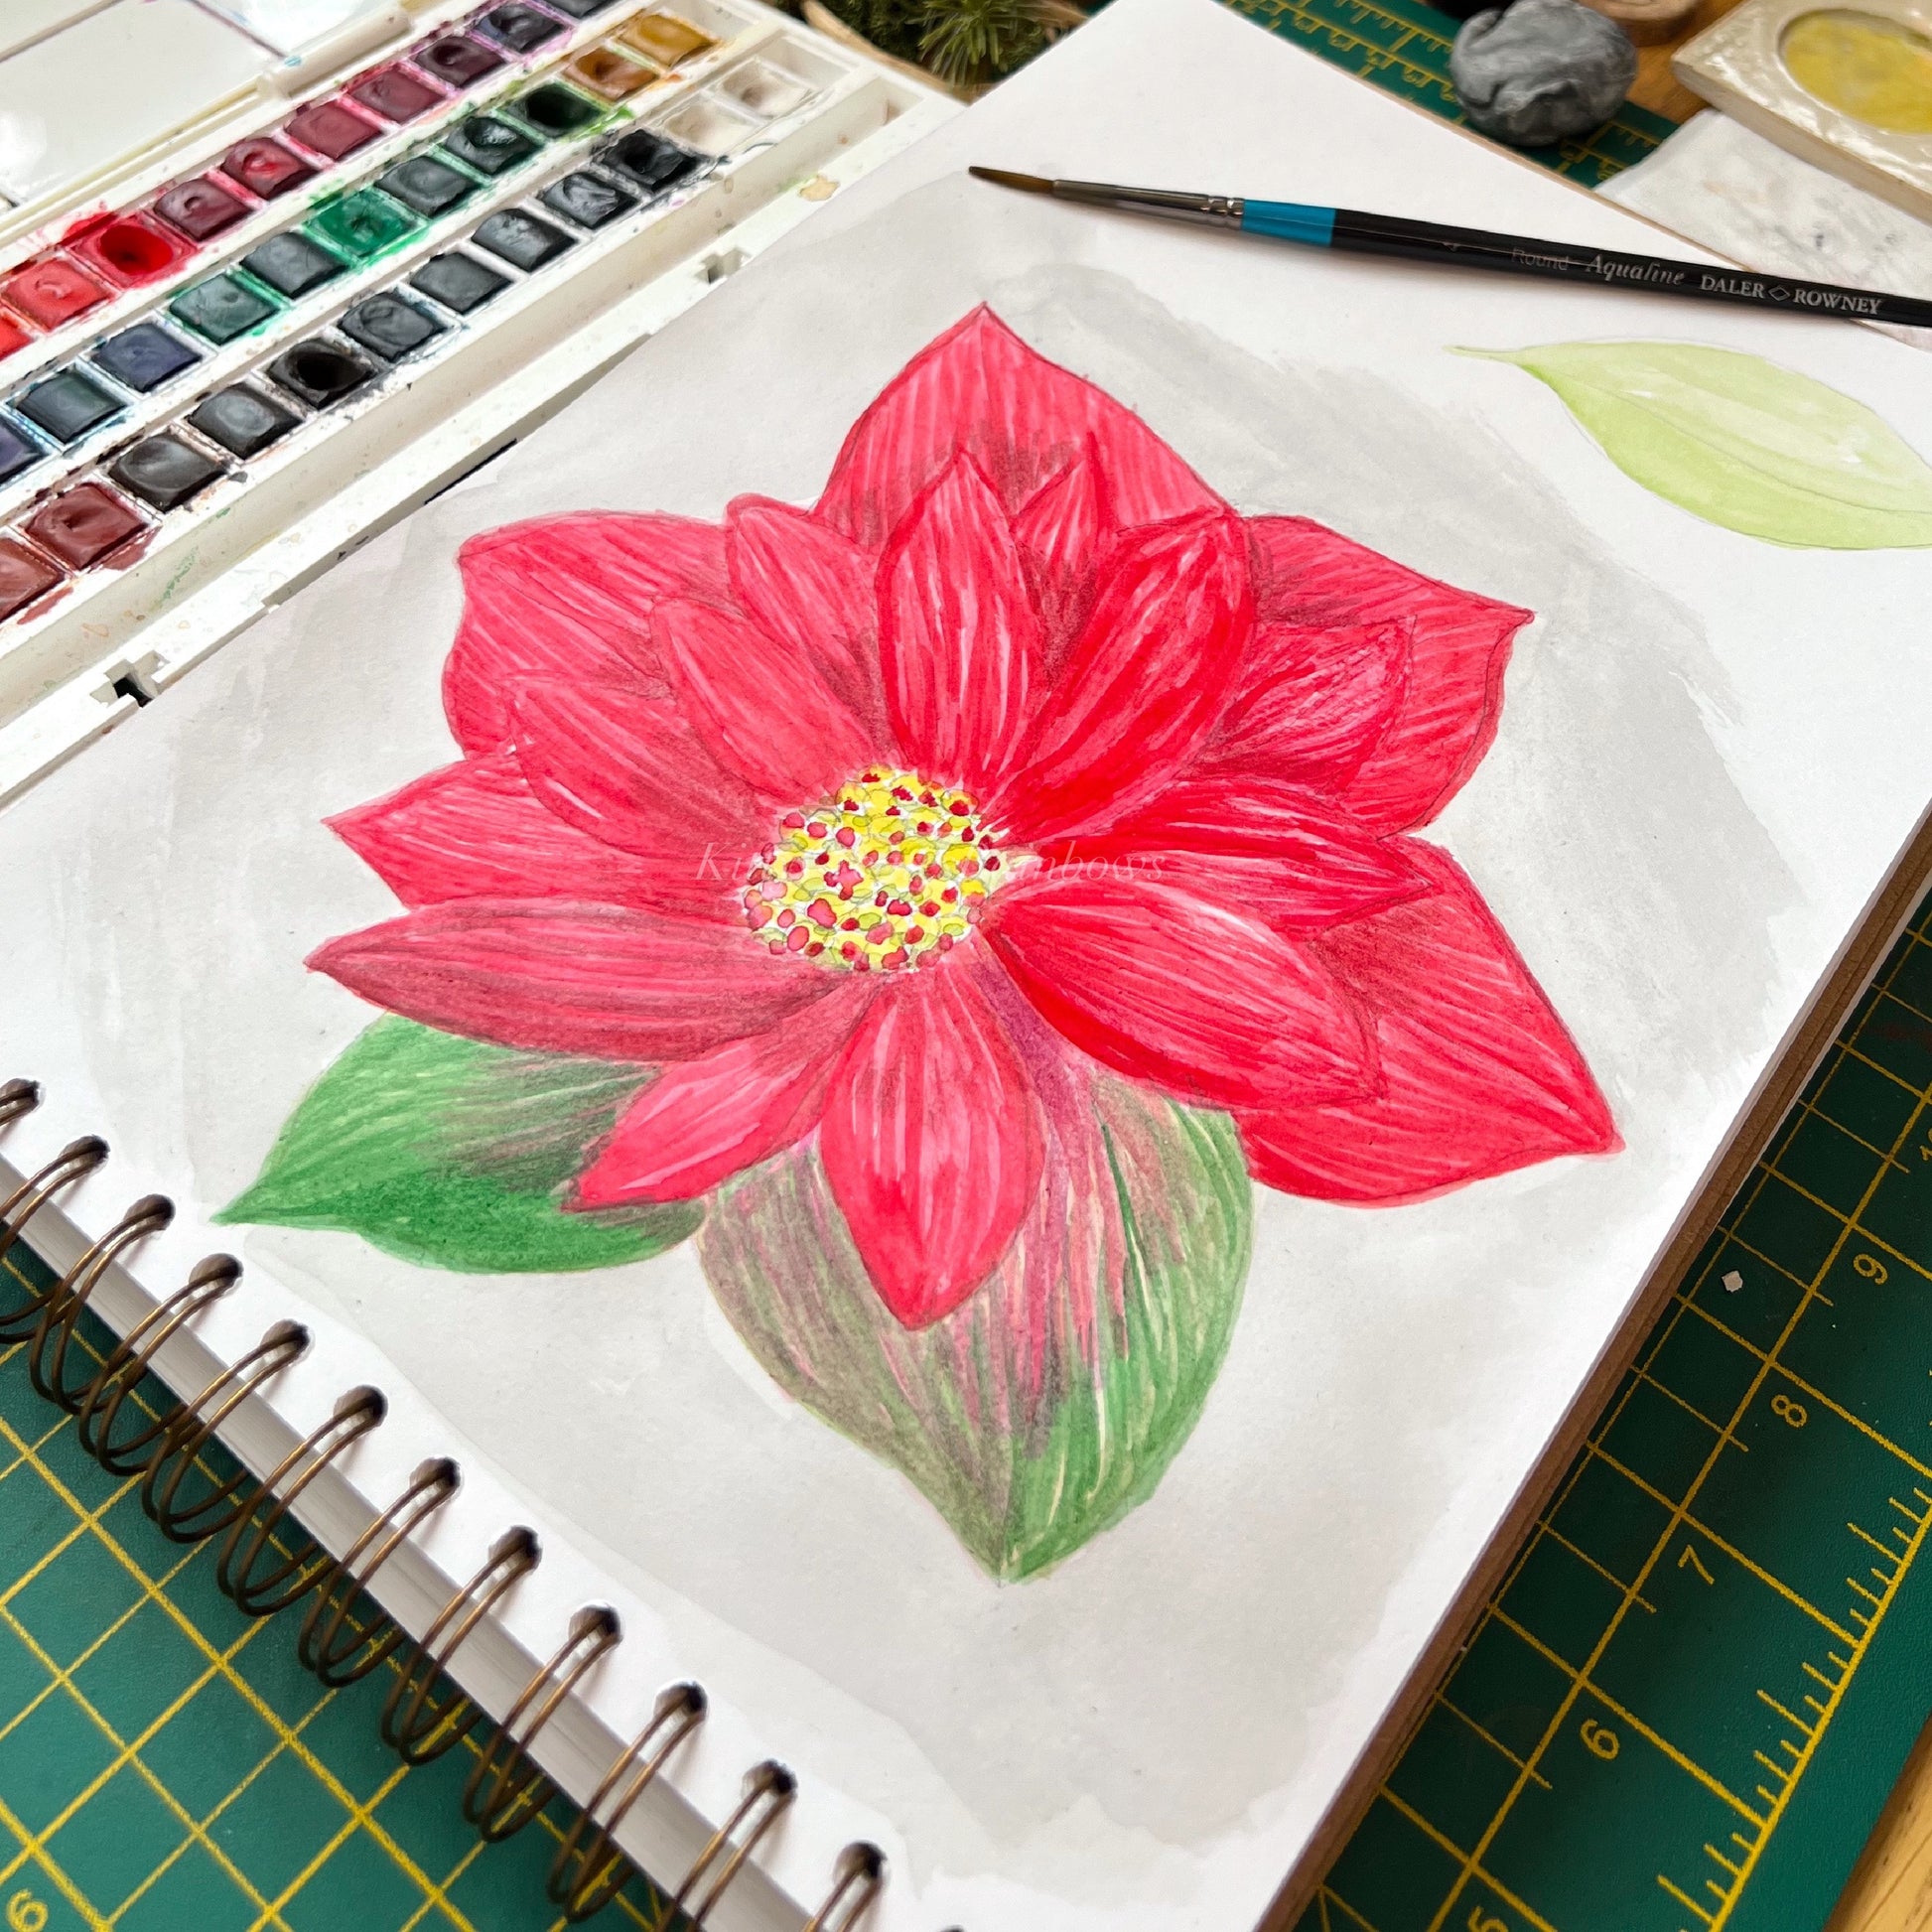 Watercolour painting of a red poinsettia in sketchbook by Kat Lovatt